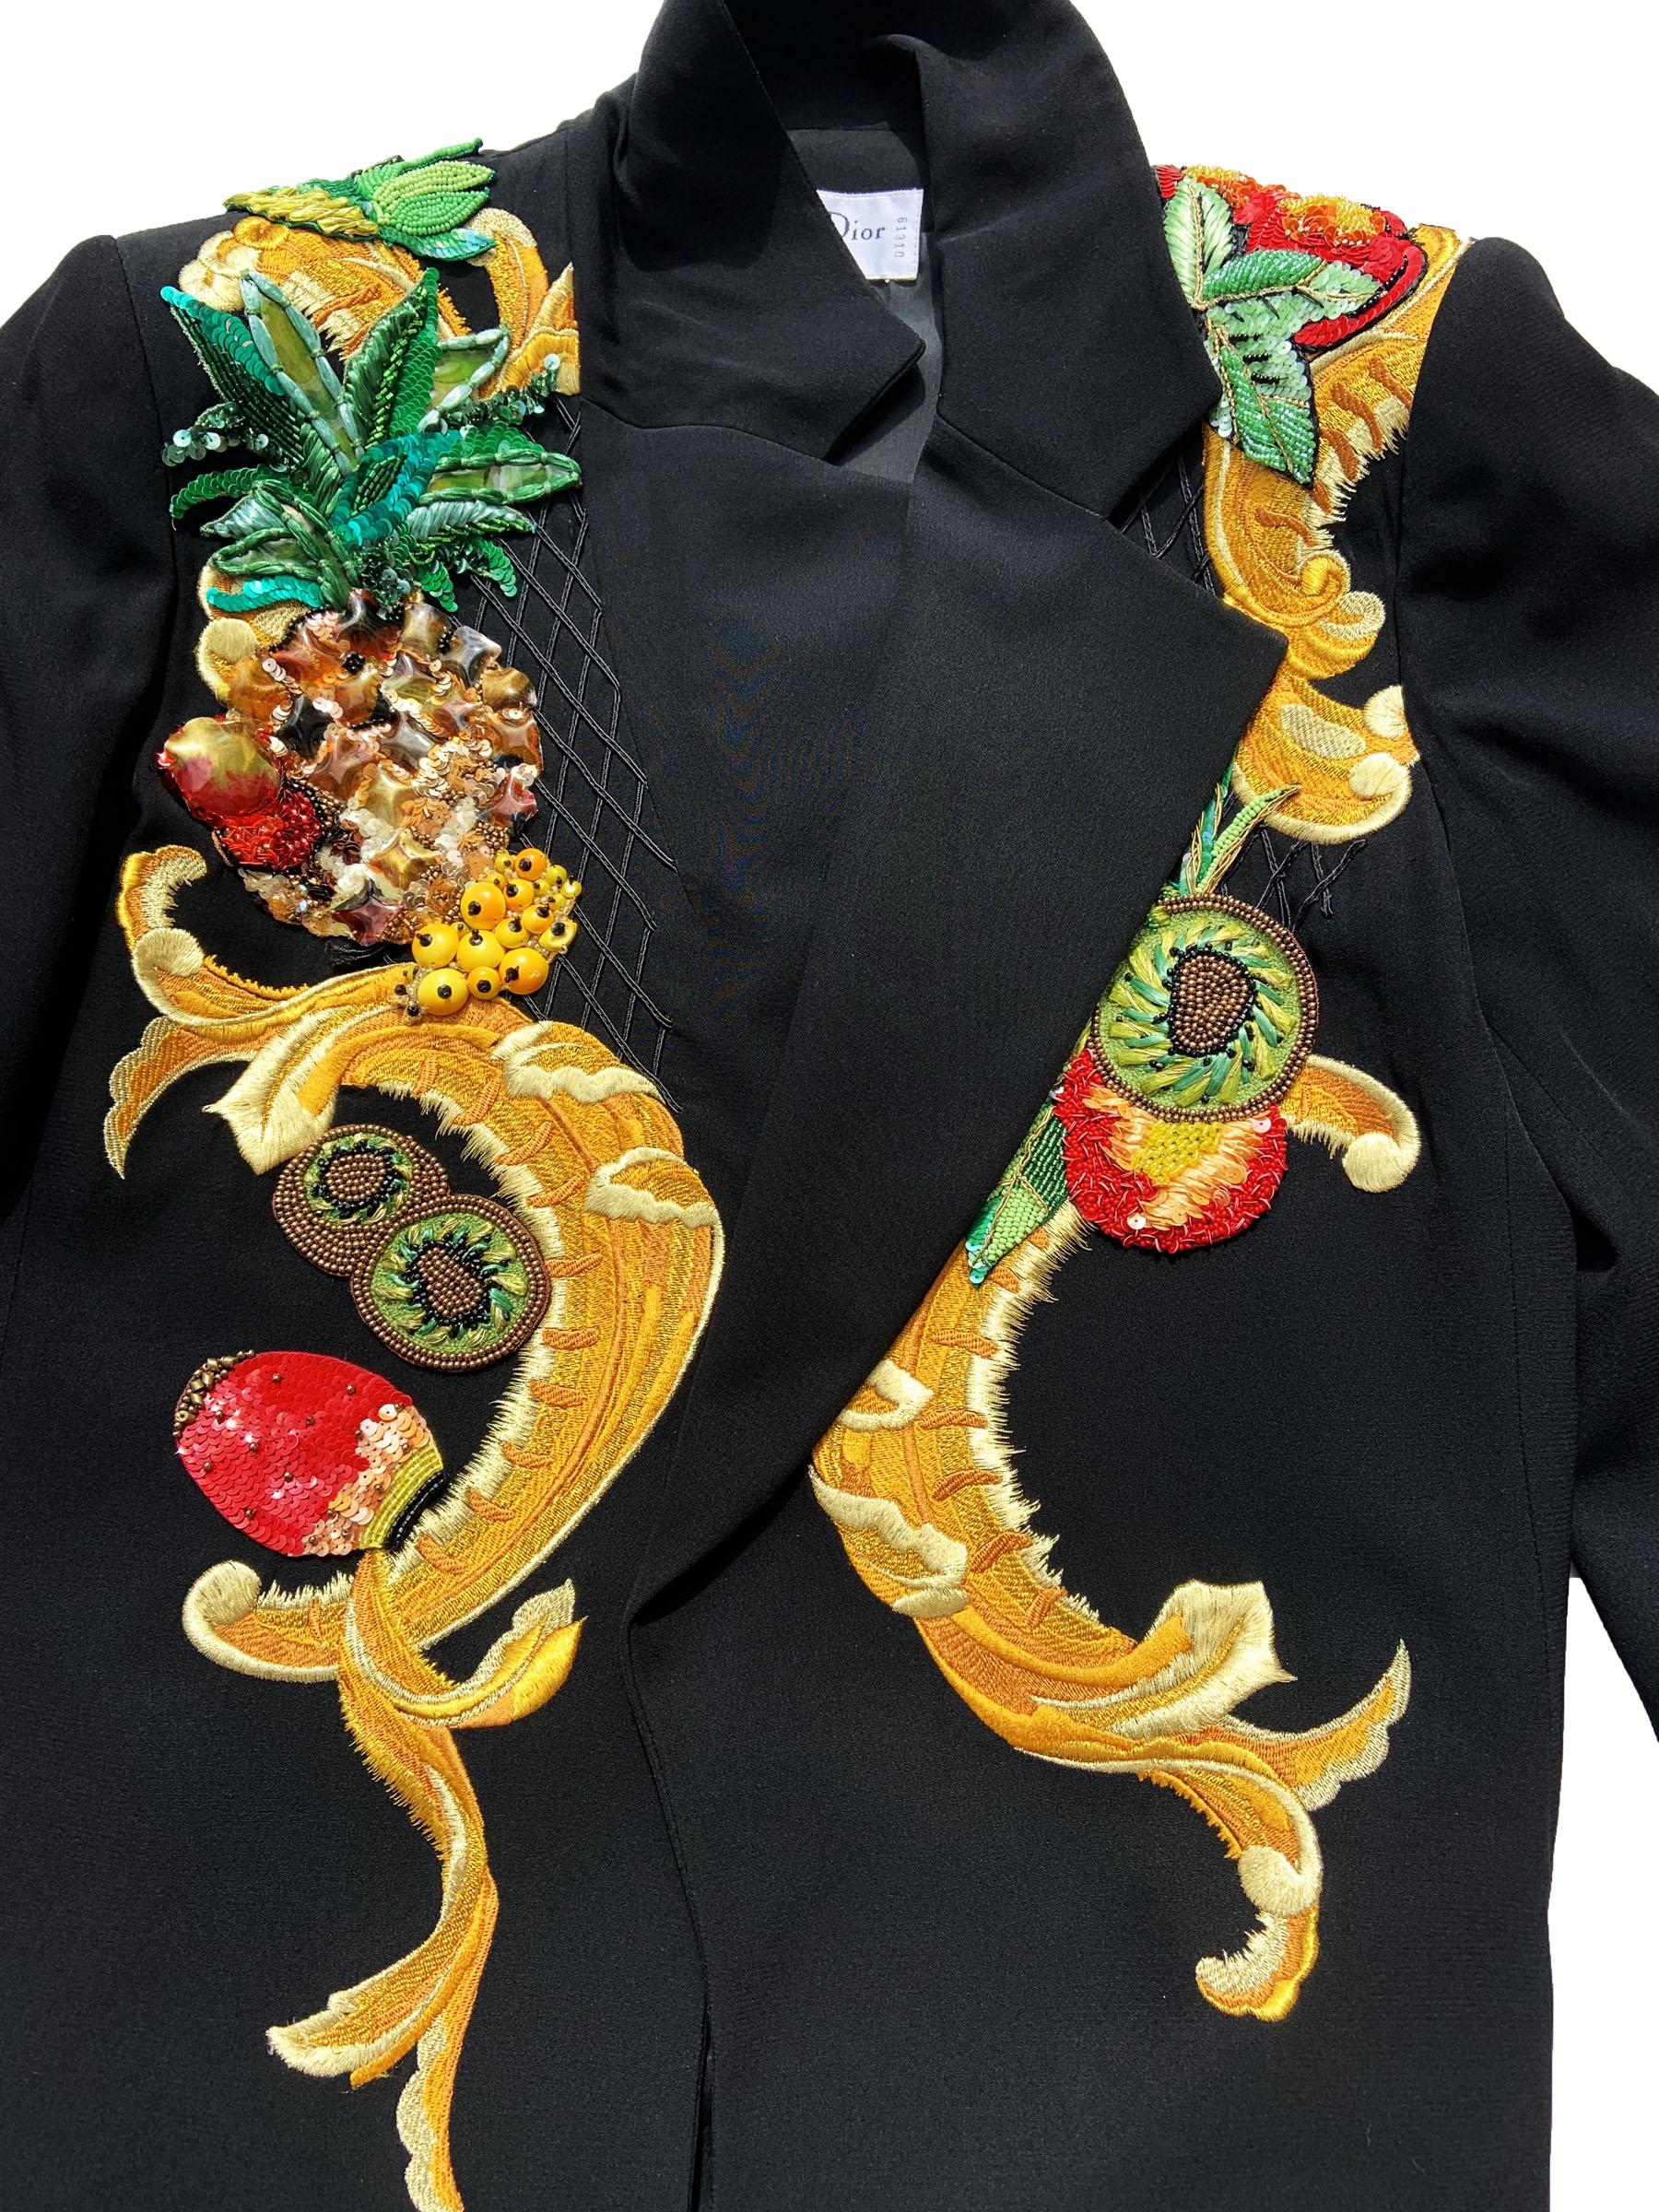  Christian Dior 1980's Numbered Beaded & Embroidered Long Blazer Jacket + Top  For Sale 2